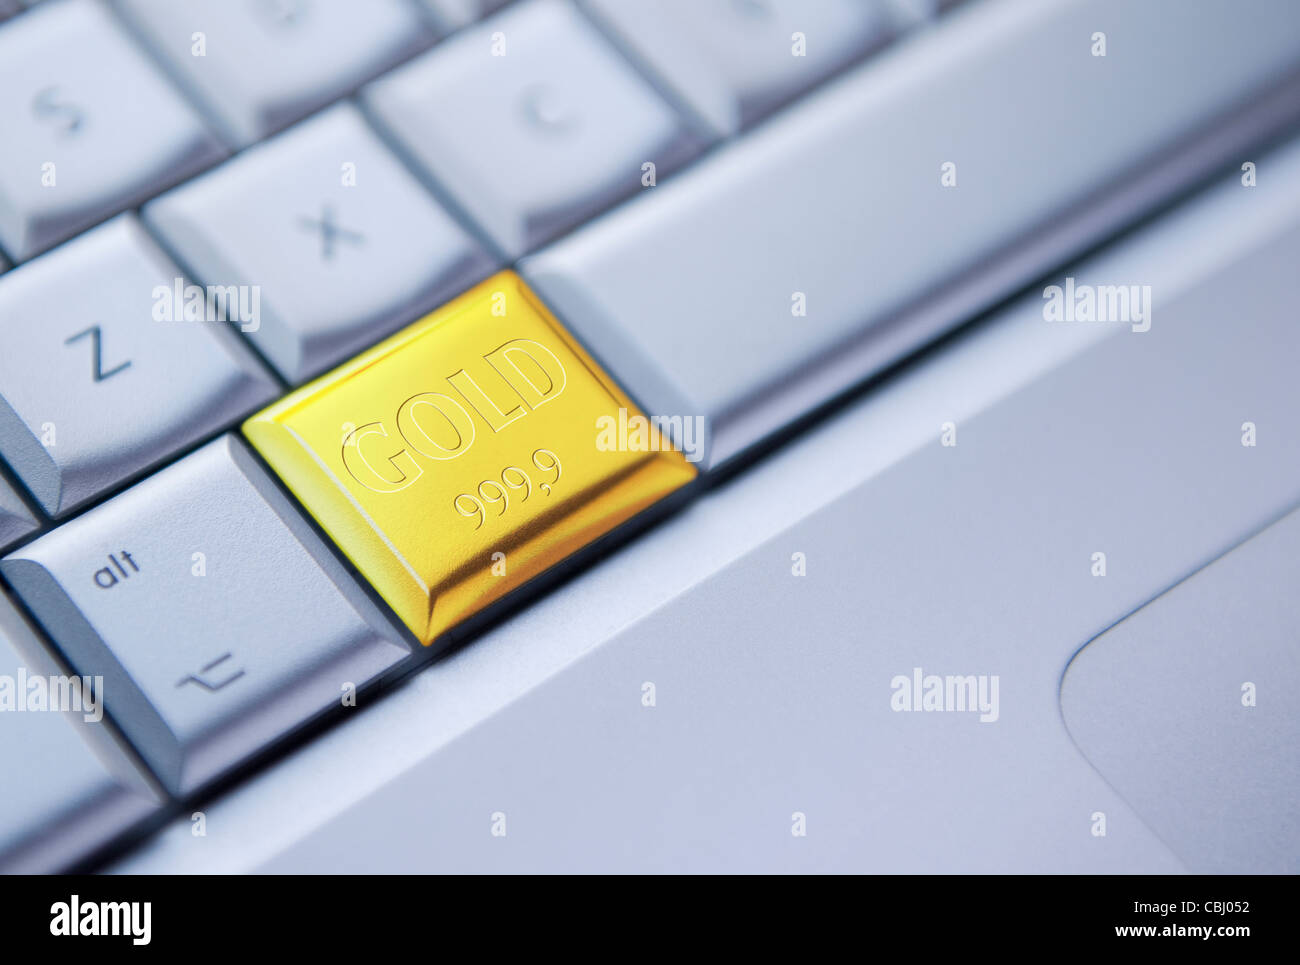 Buying Gold Online. Concept image of keyboard with one key depicted as a gold bar Stock Photo